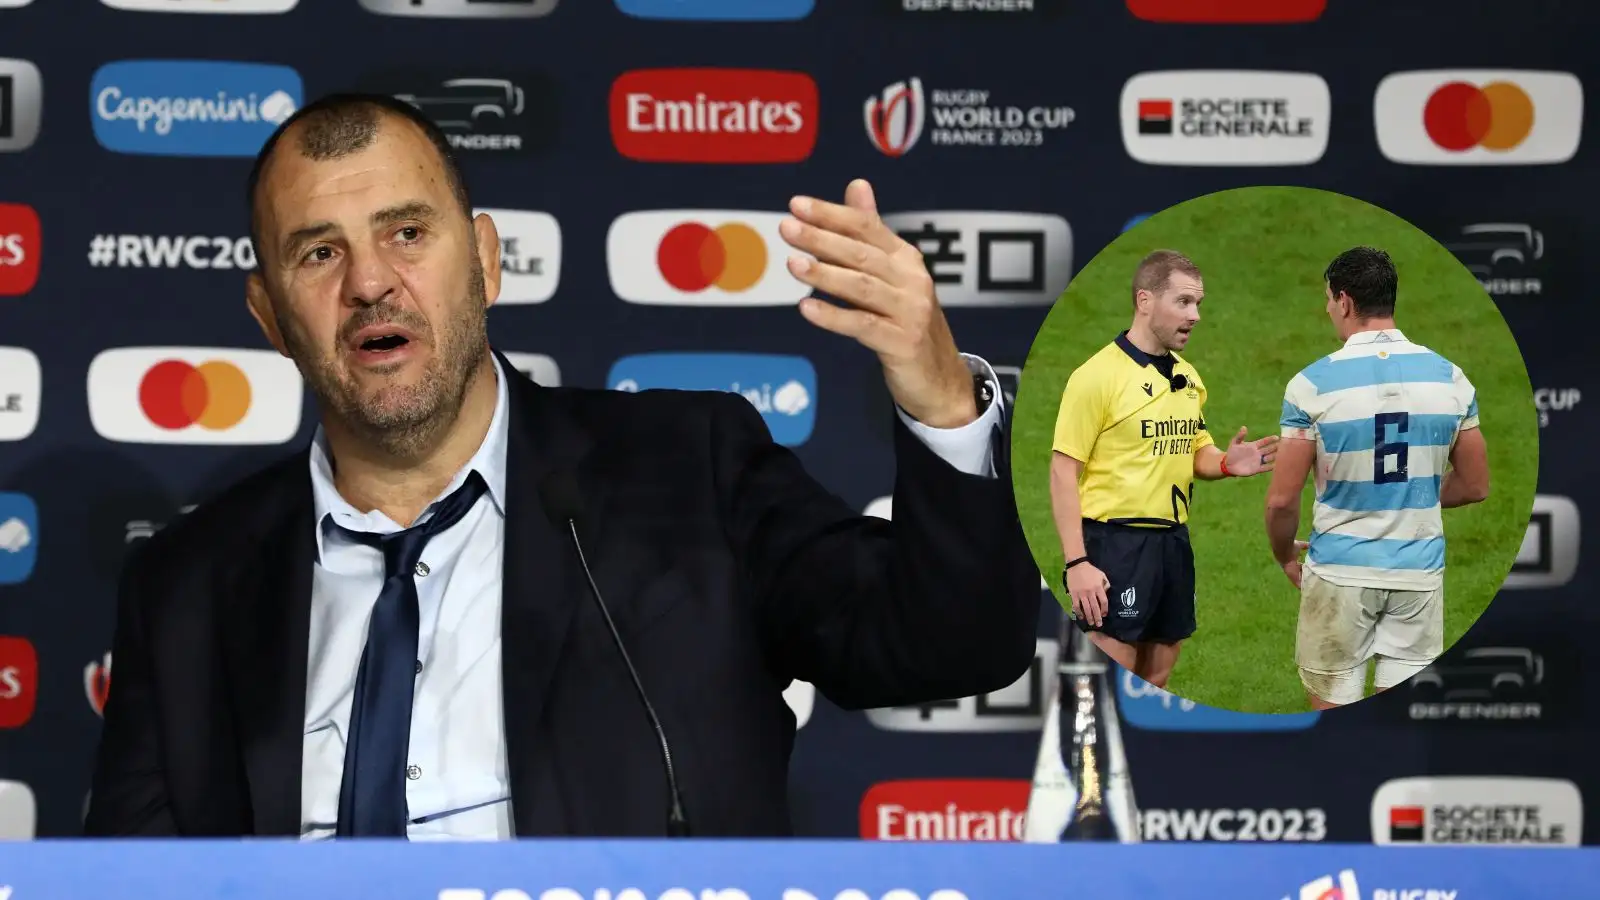 Head coach Michael Cheika during the press conference following the semifinal between Argentina and New Zealand and referee Angus Gardner speaking to Juan Martin Gonzalez